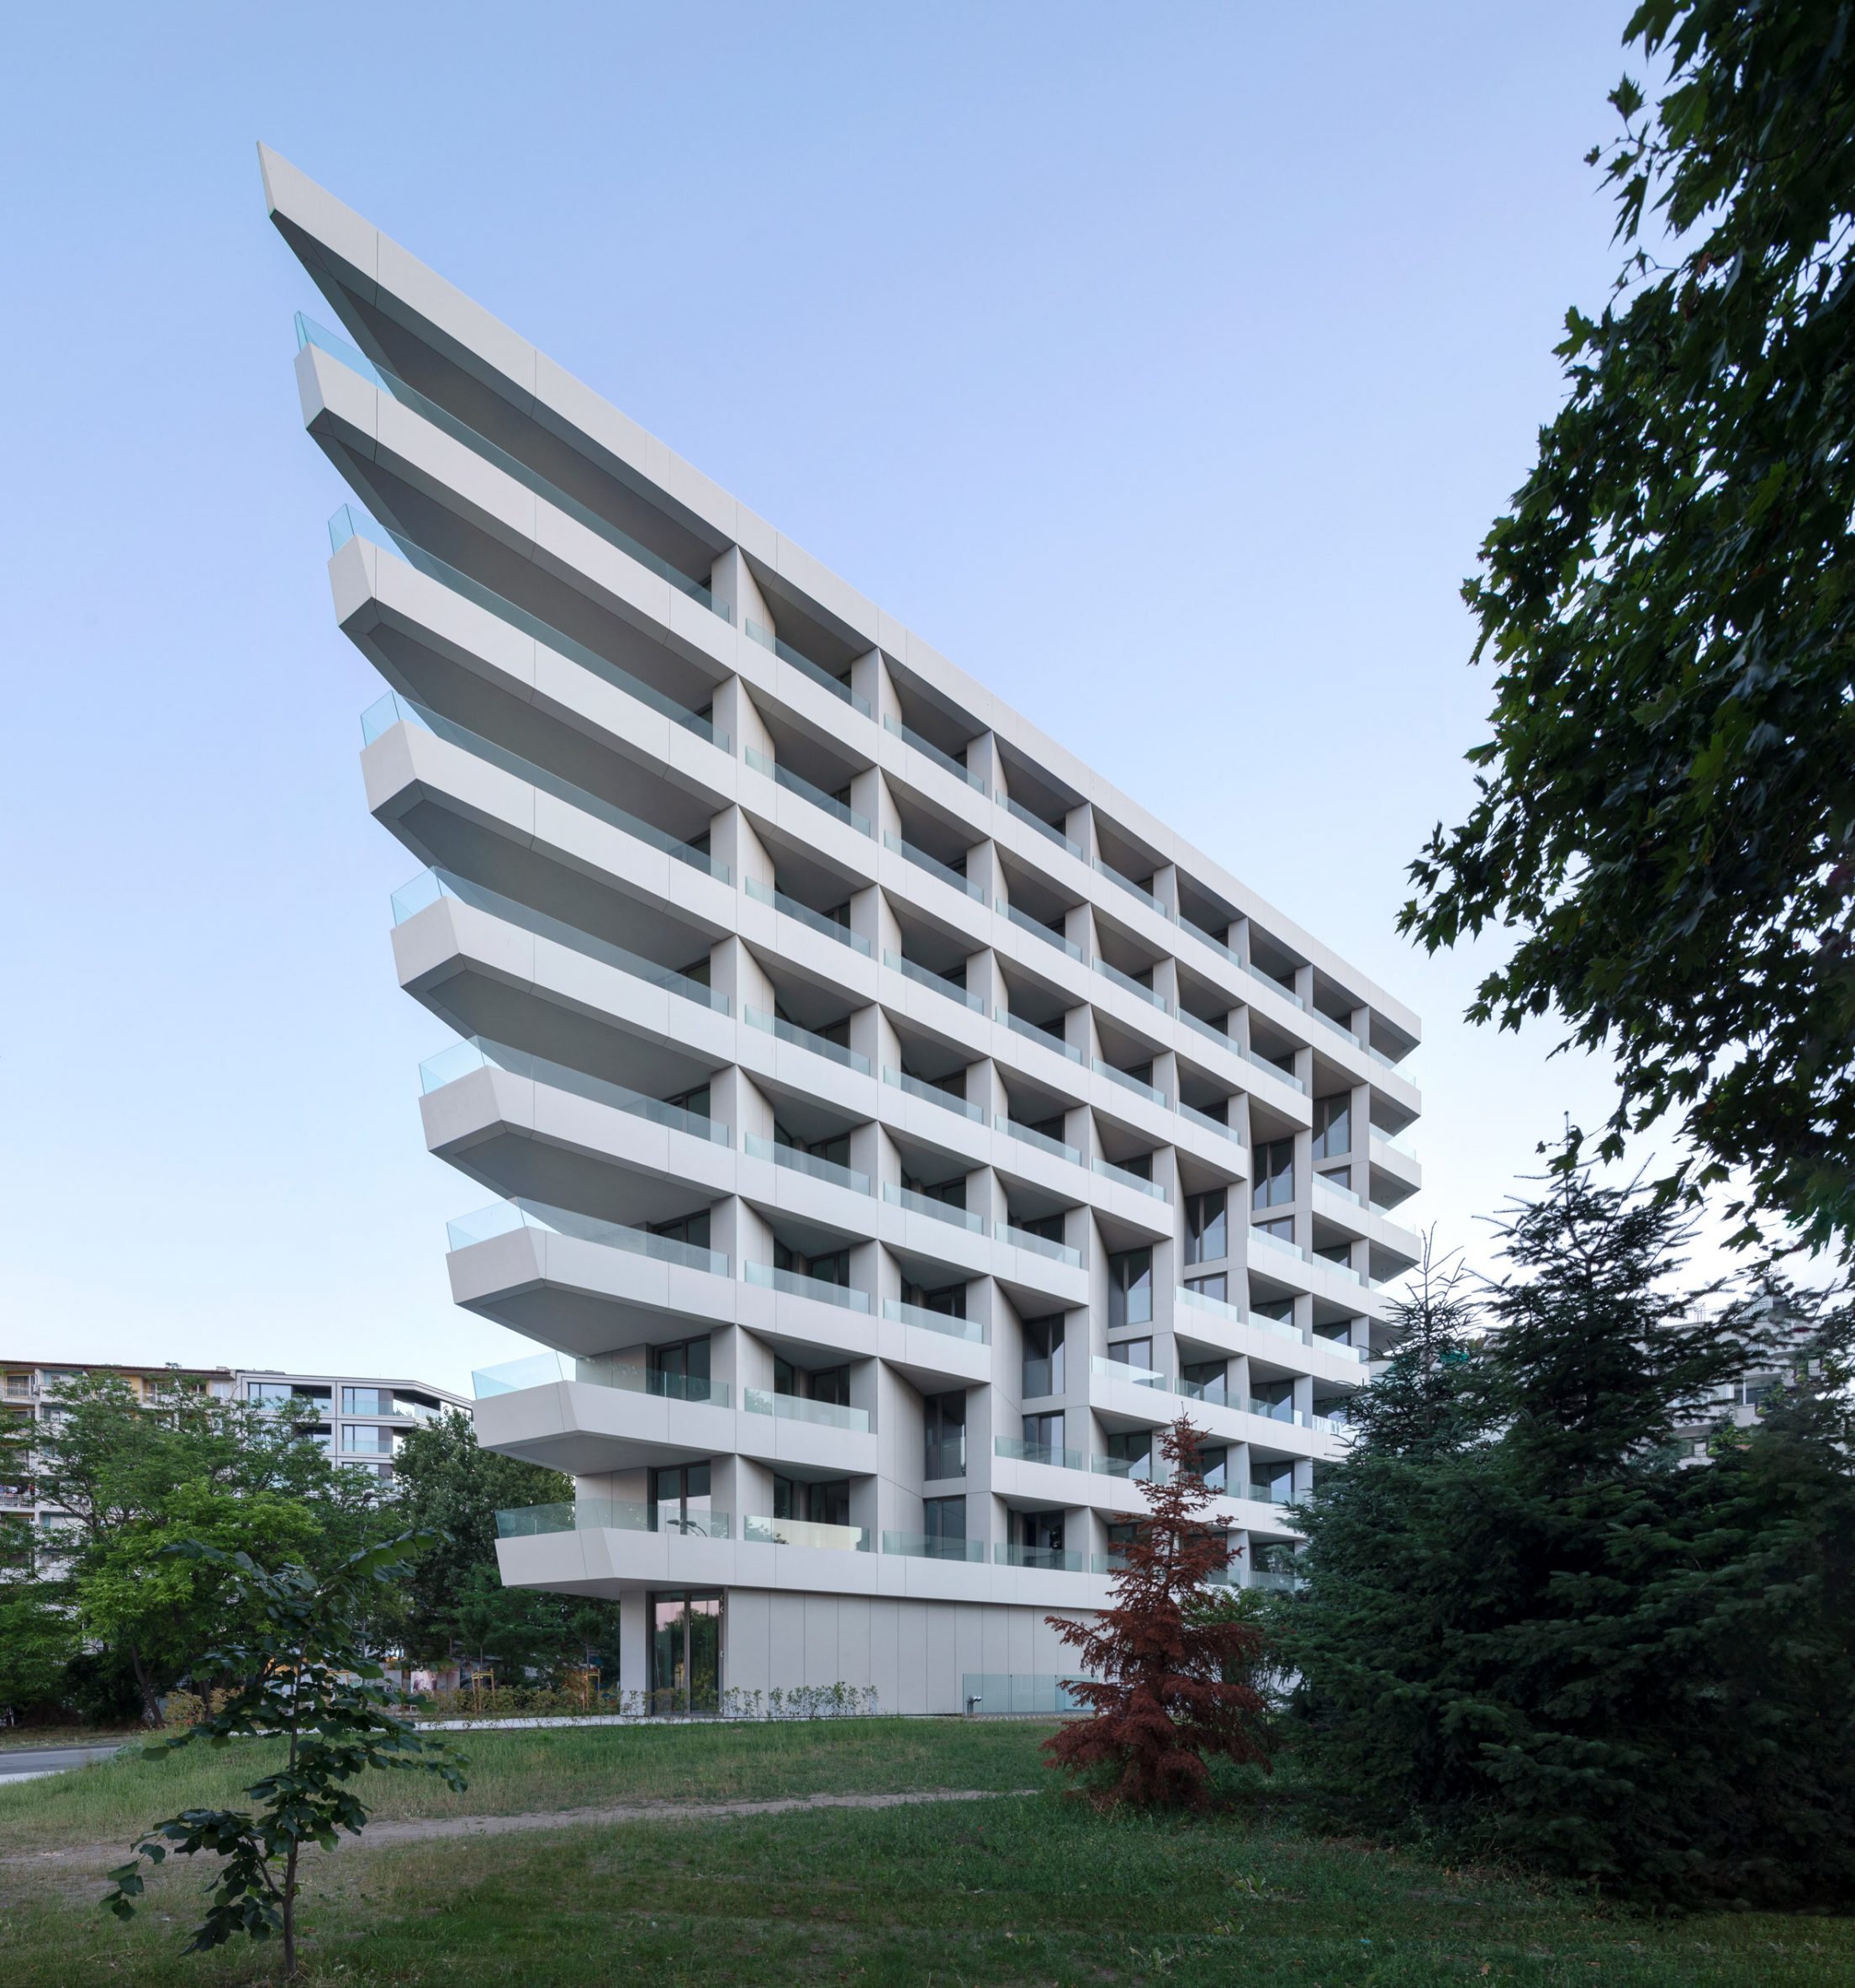 Cantilevering balconies of Eos building by Starh 